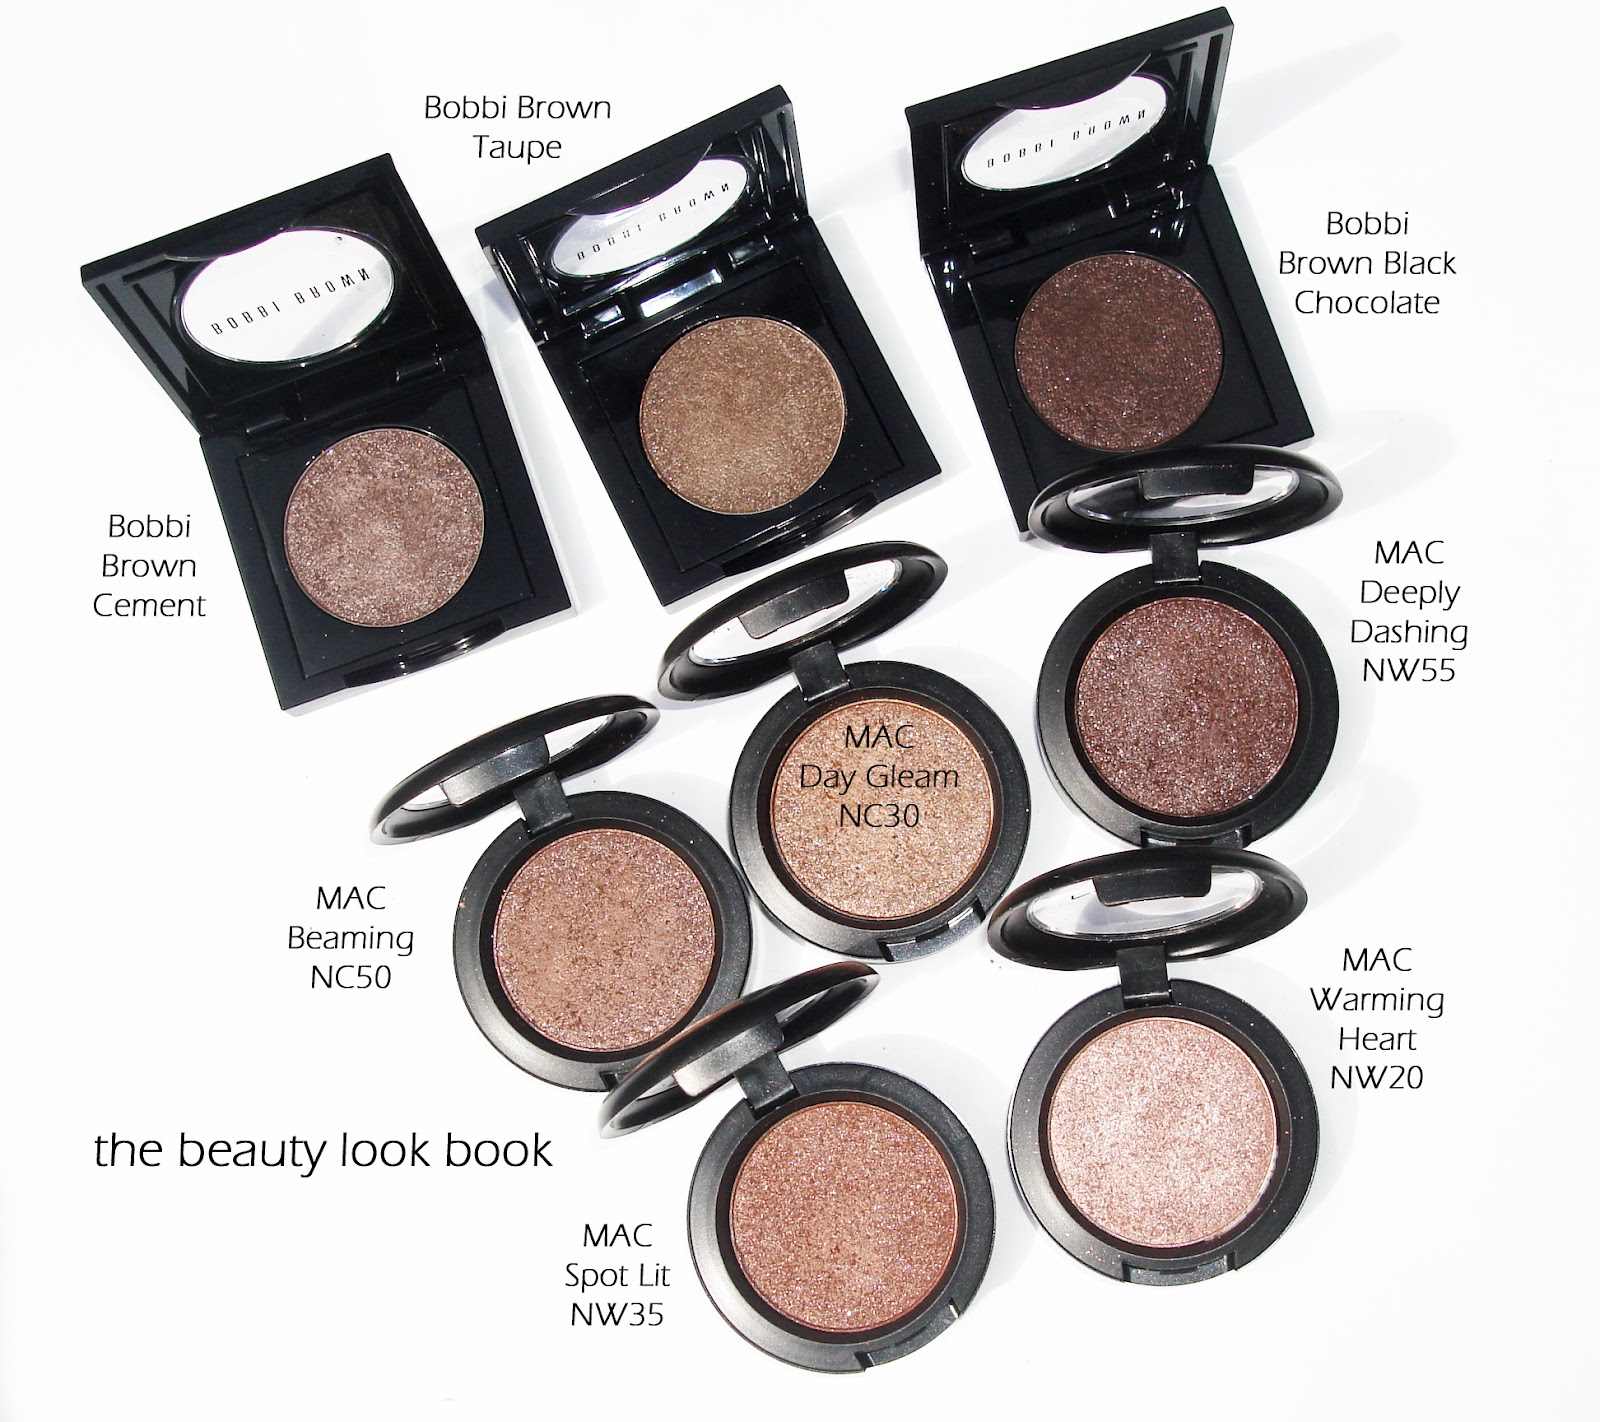 Neutral Glimmer Eyes: Bobbi Brown Sparkle Eye Shadows and MAC Pressed Pigments - The Beauty Look Book